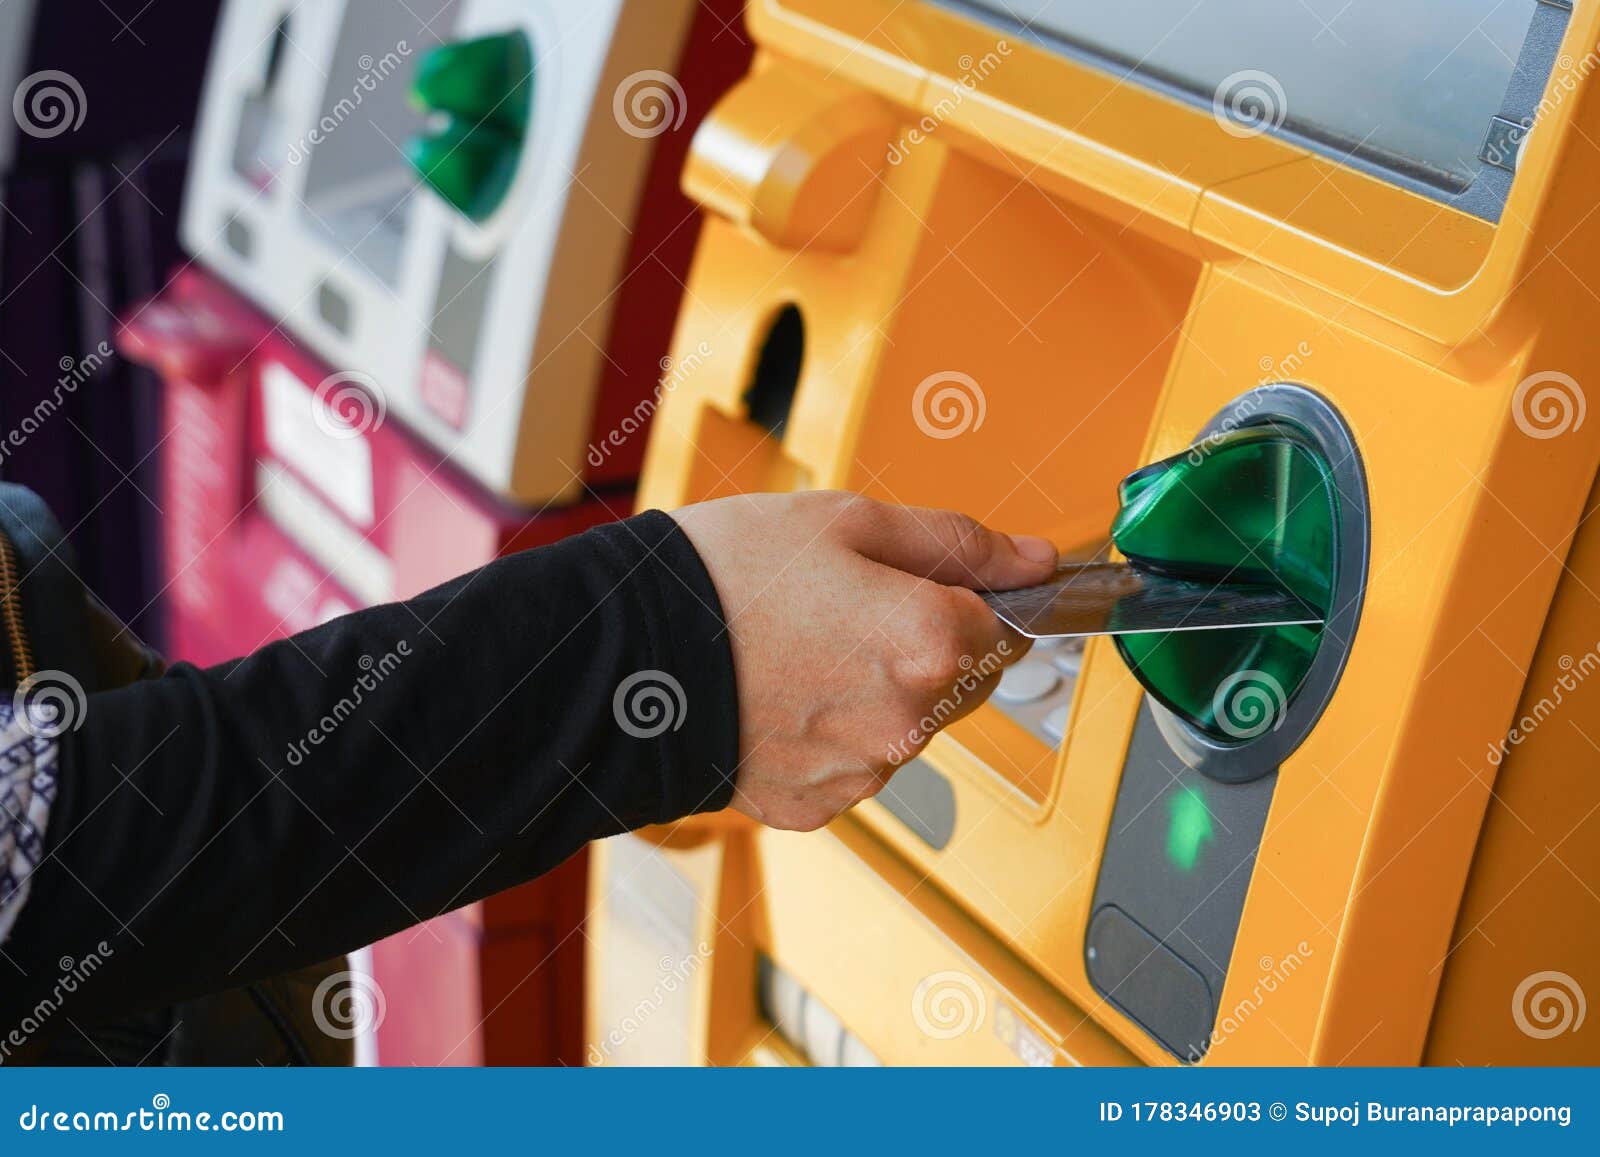 Woman`s Hand Using Credit Card To Withdrawing Or Transfer Money From Atm Machine.Finance, Money ...